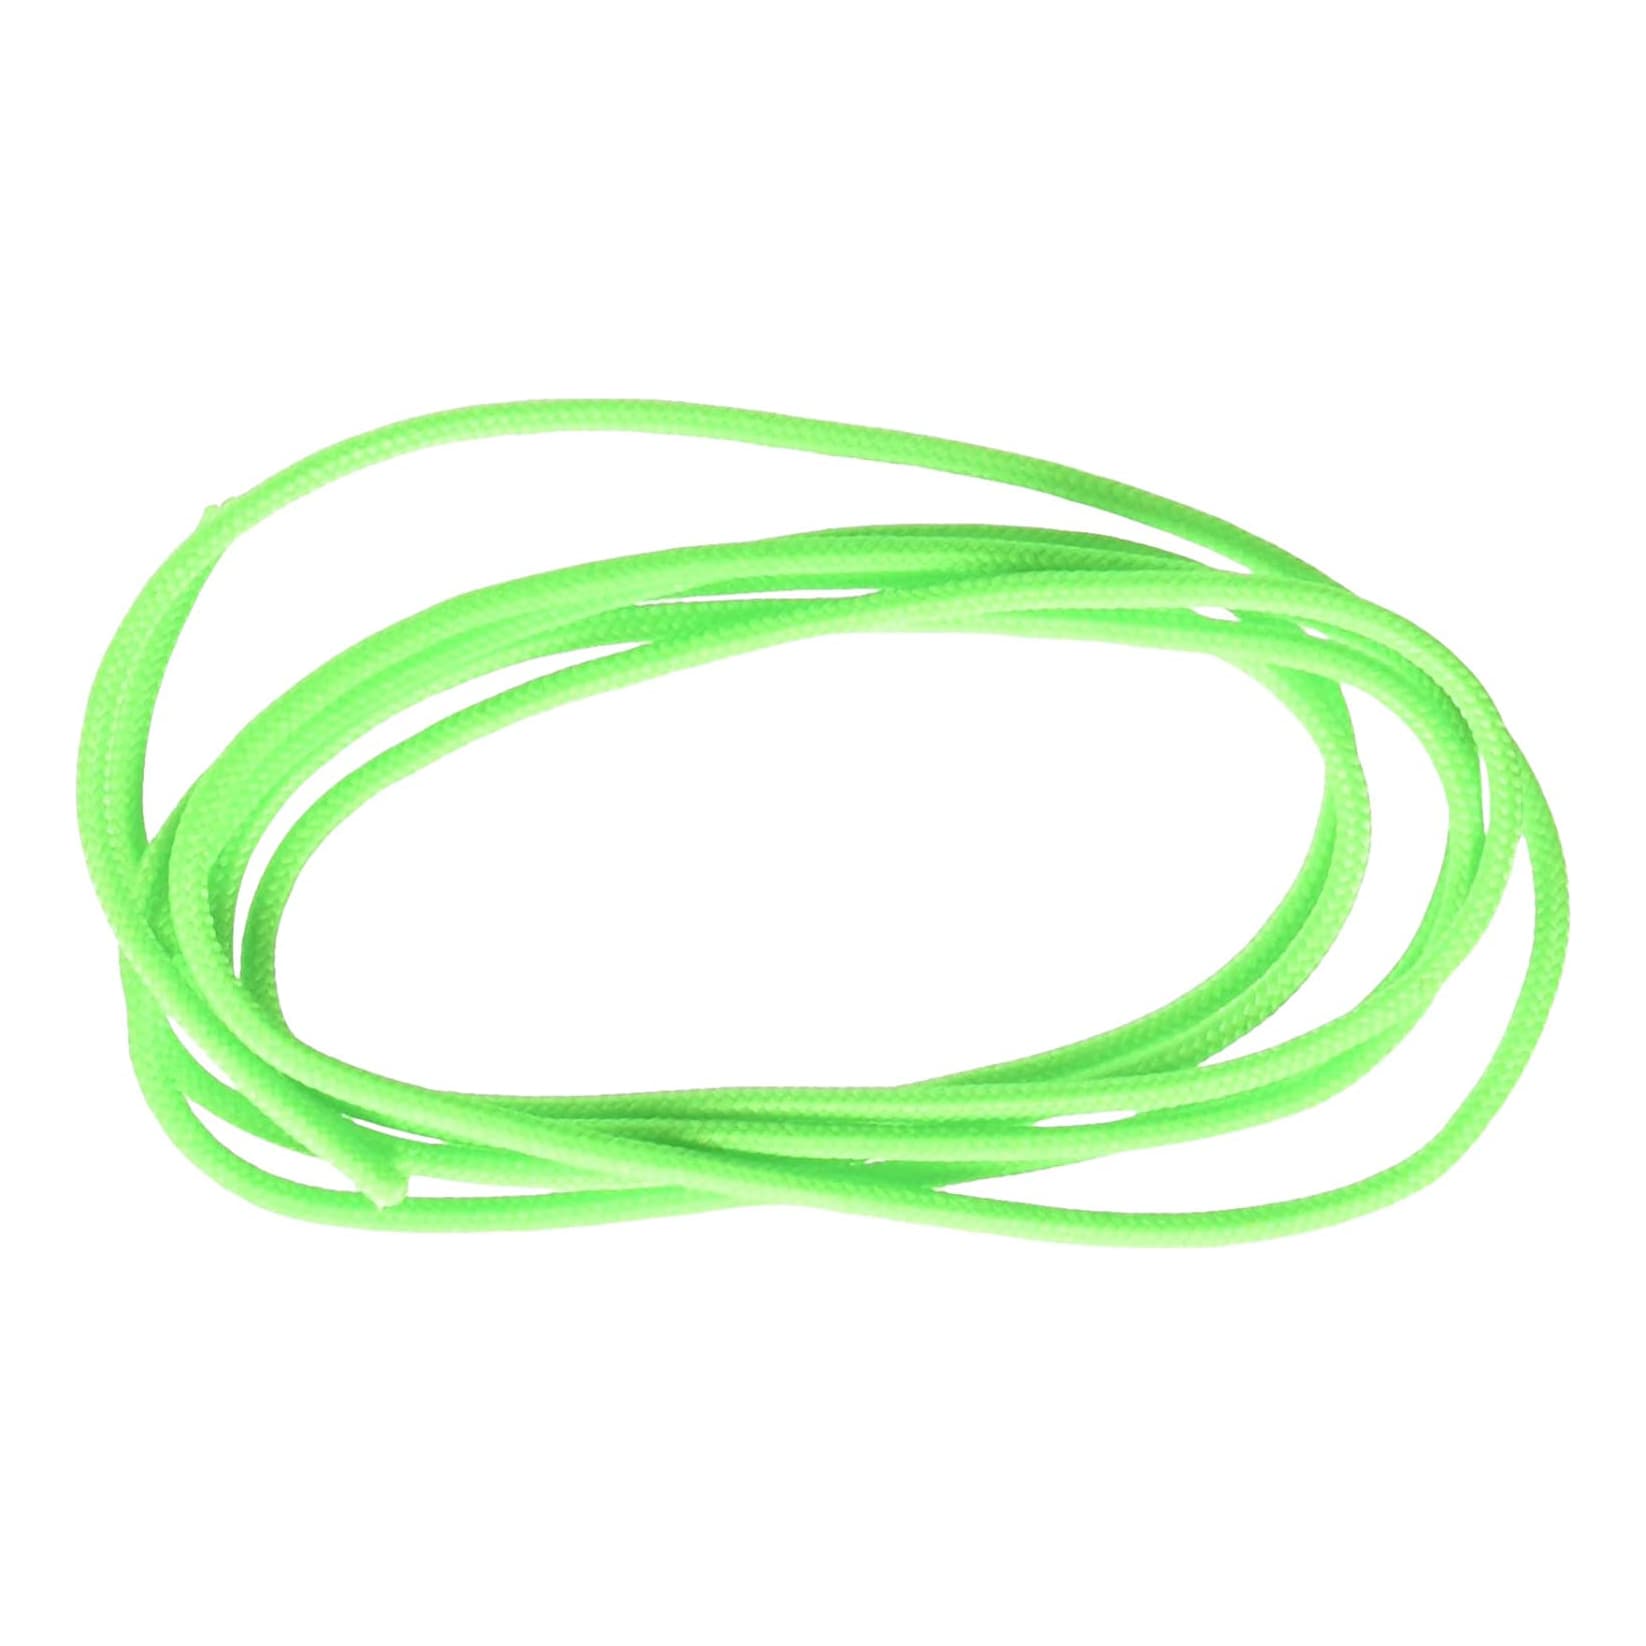 BCY 24 D-Loop Material - Fluorescent Green